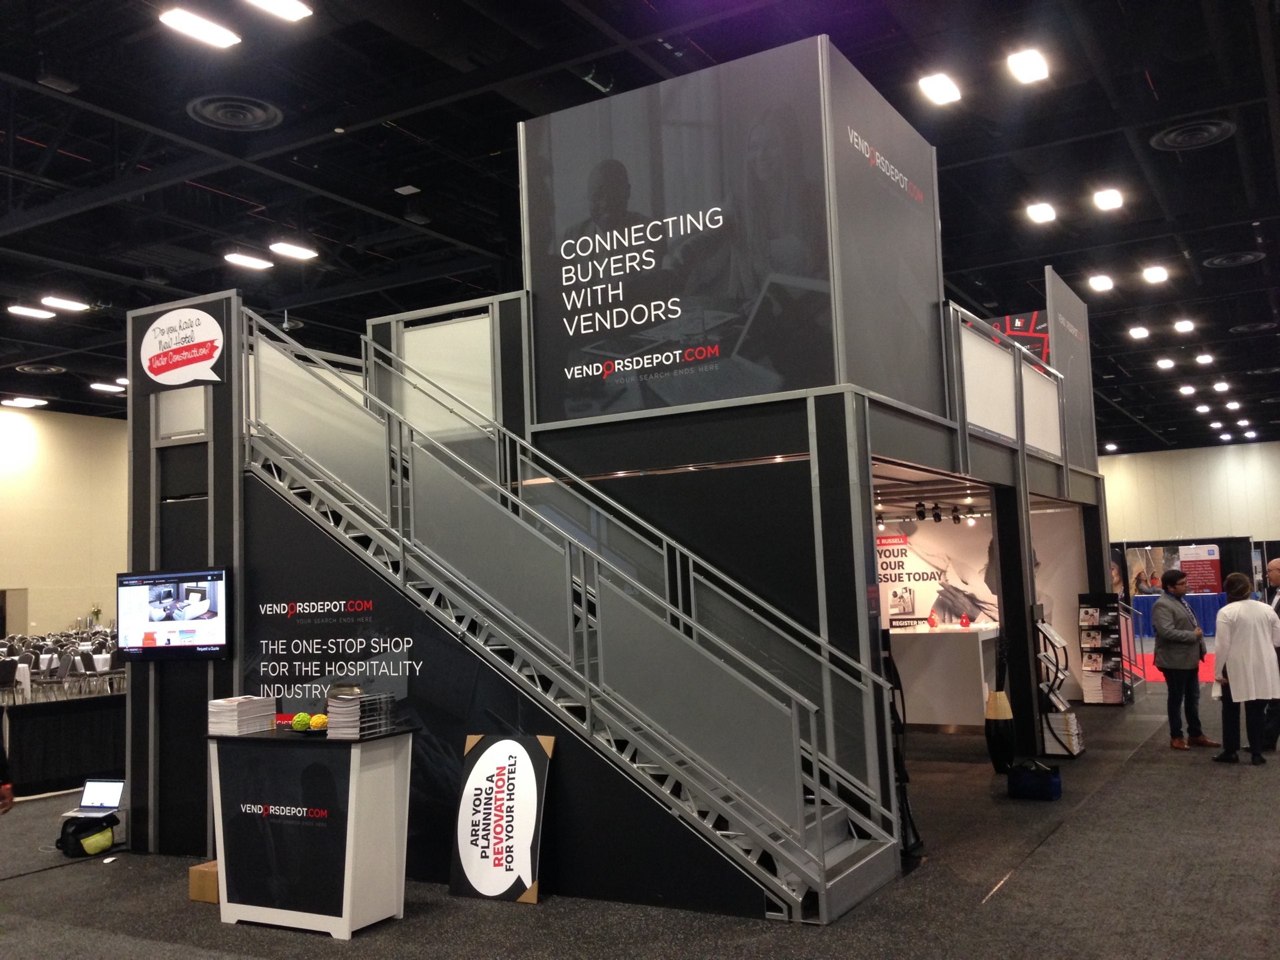 Good graphic messaging on two story trade show exhibit rental